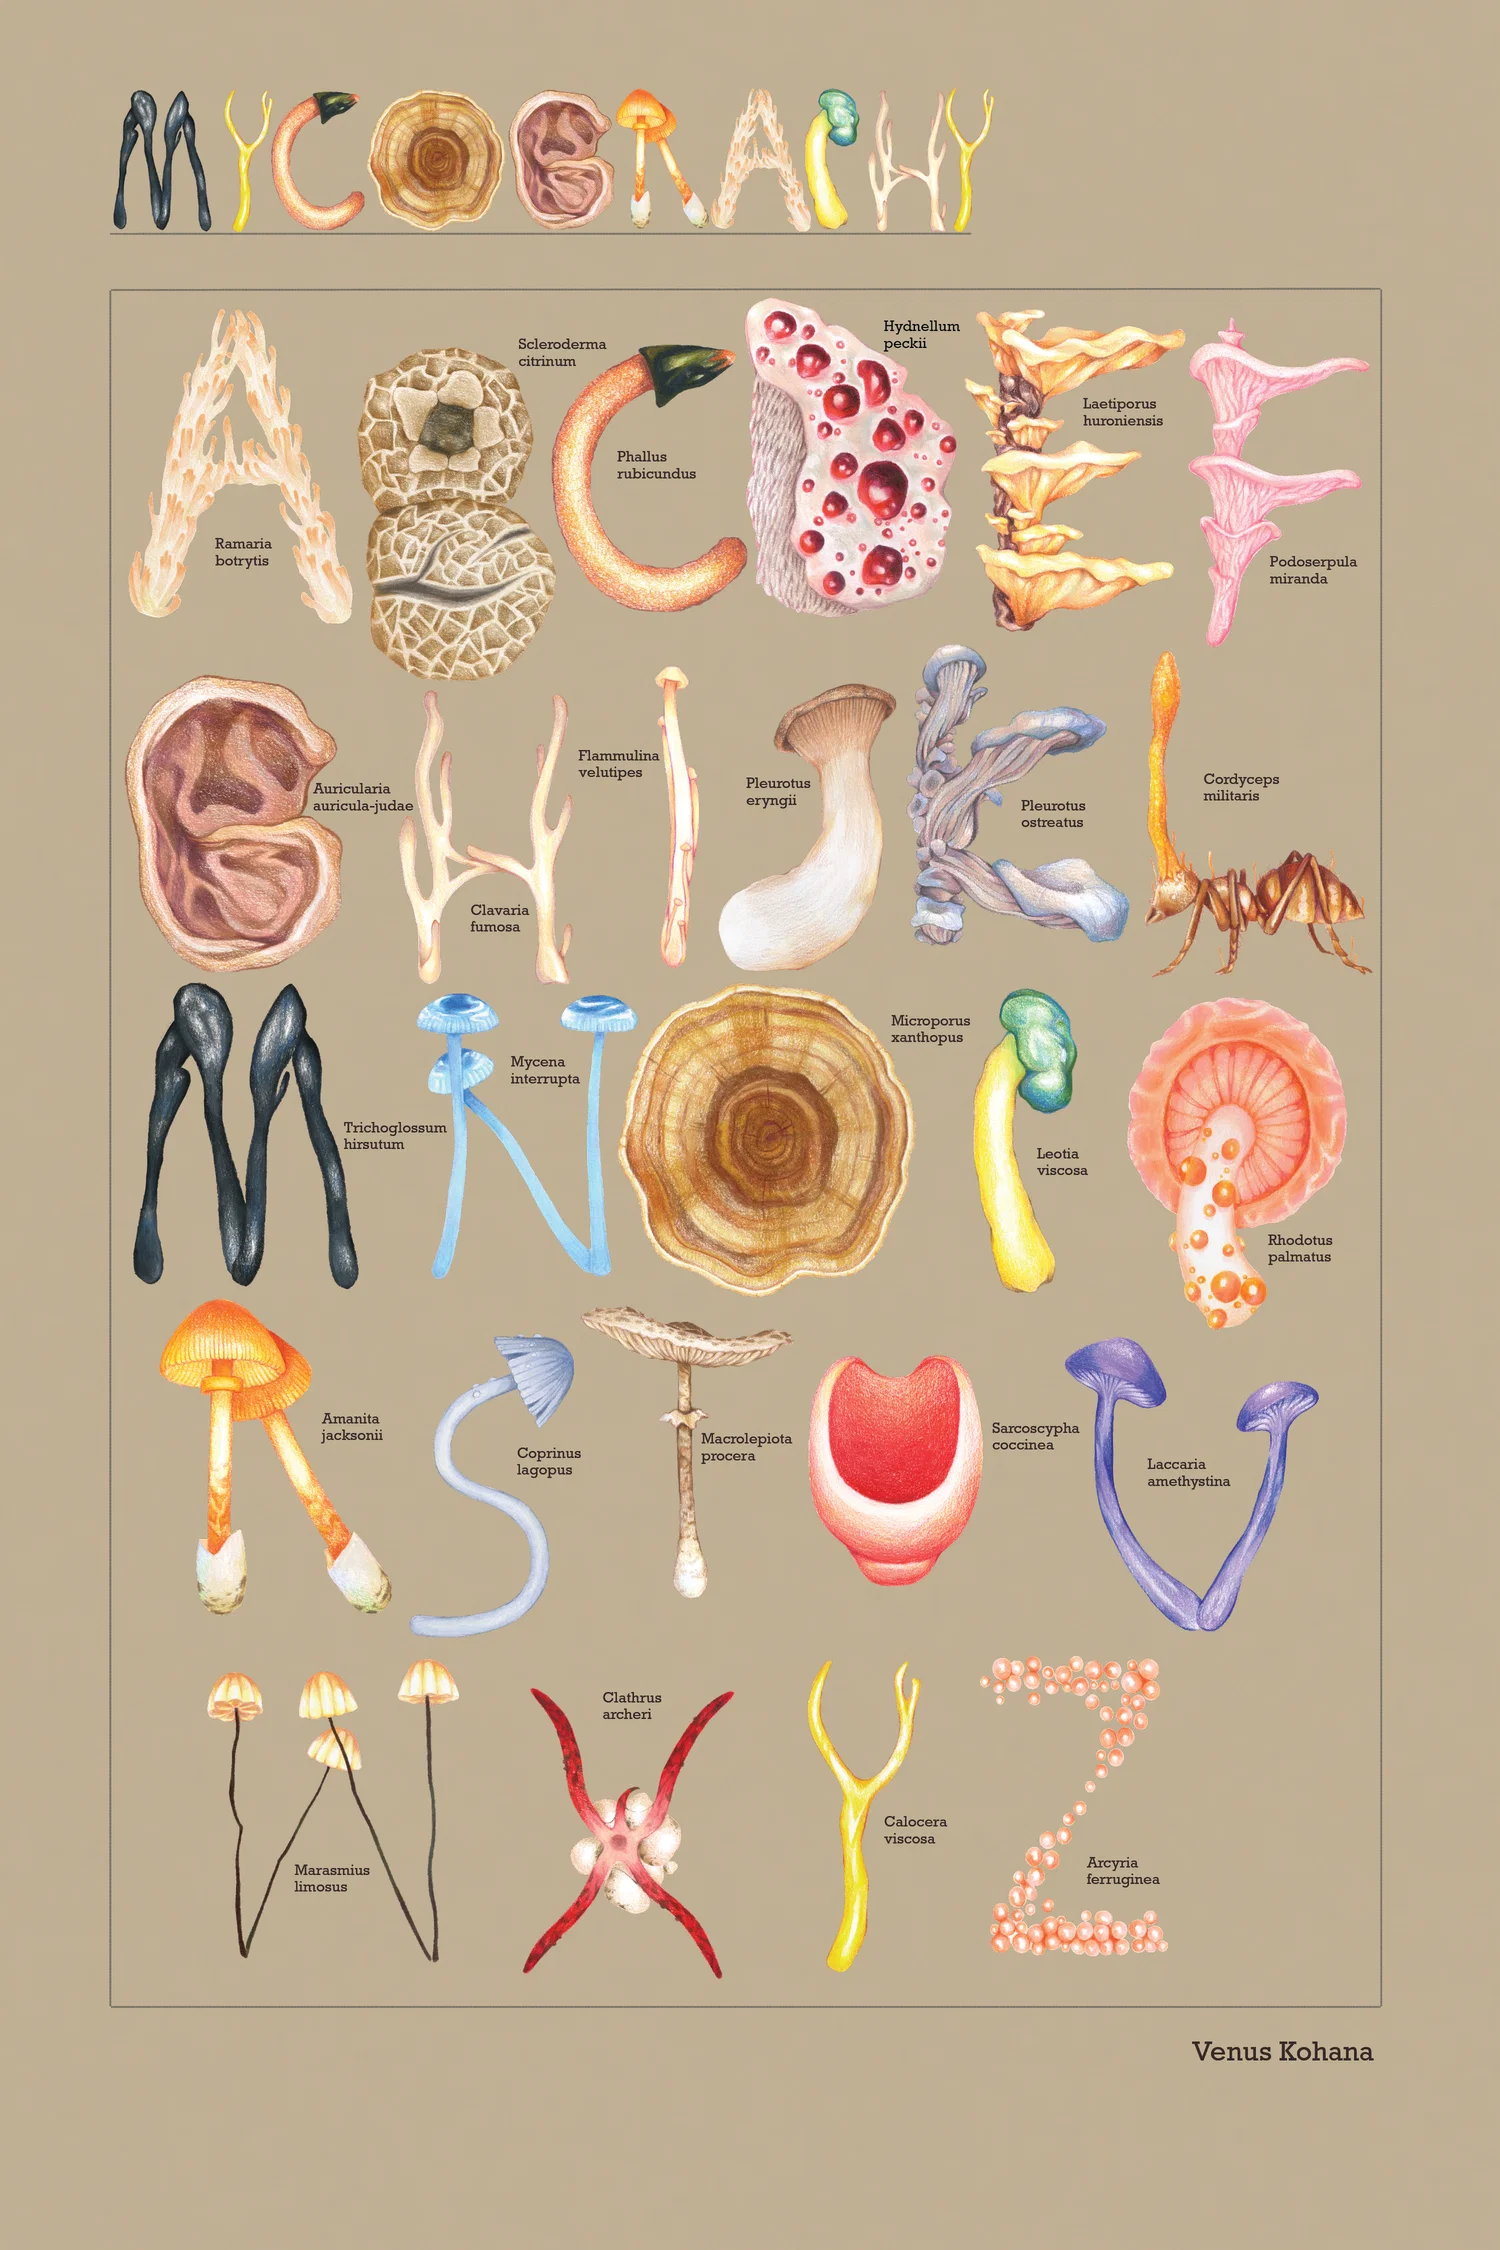 An alphabet layed out in the style of a scientific illustration poster. Each letter is a mushroom species in the shape of the corresponding letter.